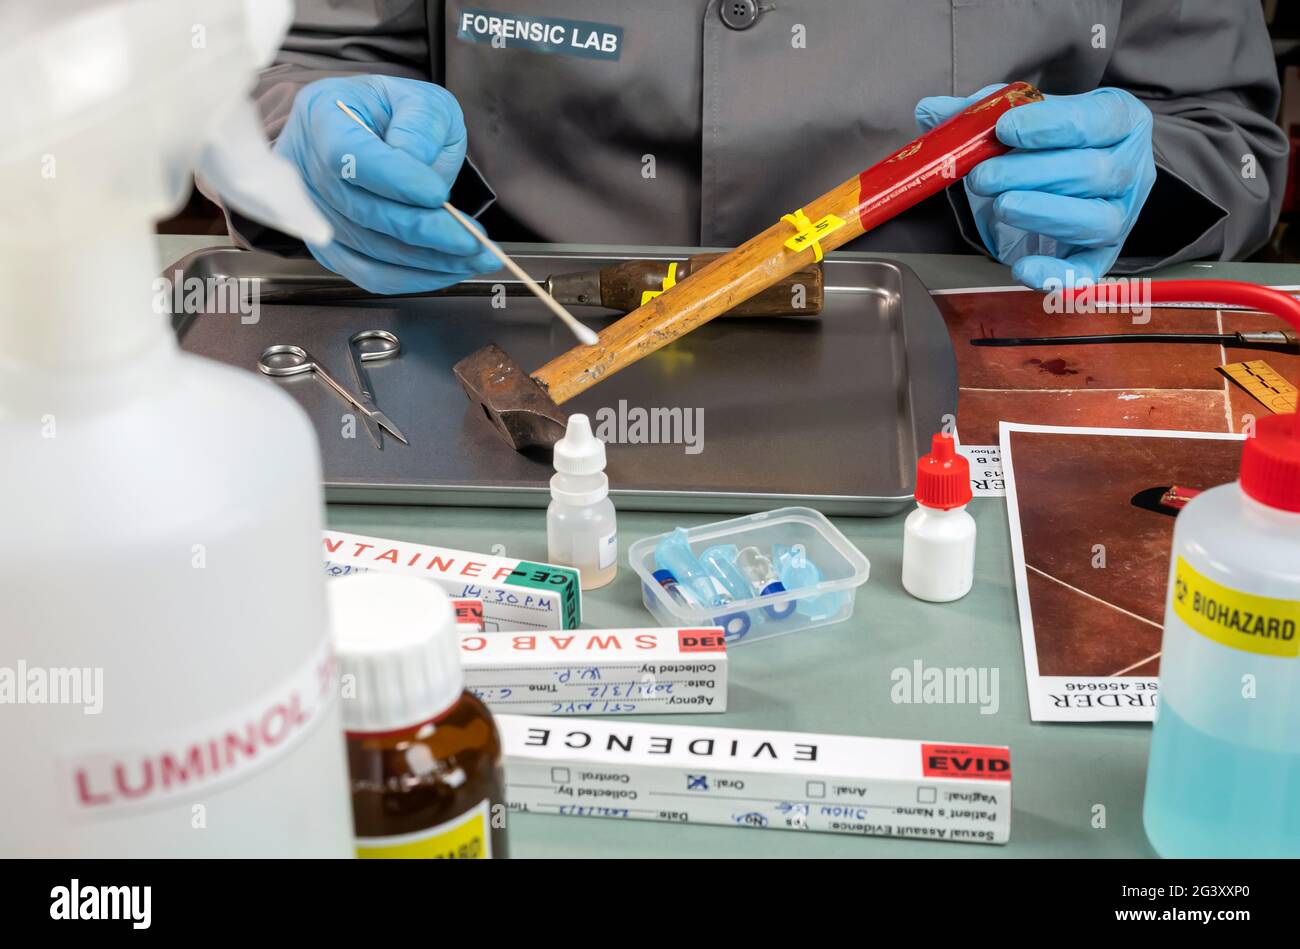 Police scientist extracts DNA sample from a pair of hammer in a crime lab, concept image Stock Photo